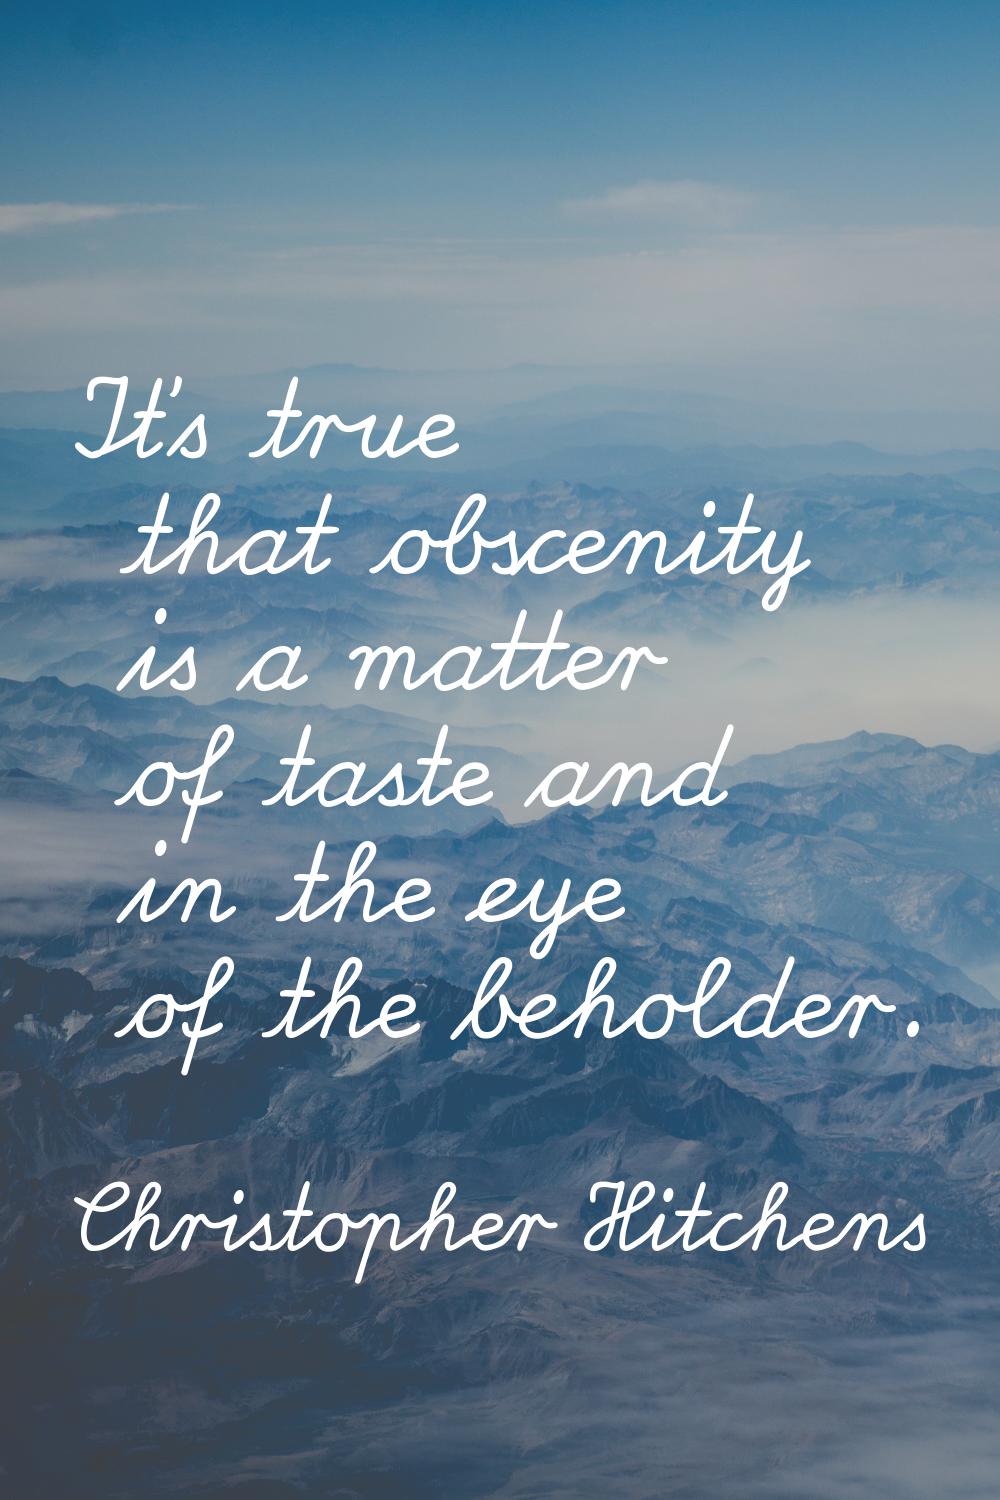 It's true that obscenity is a matter of taste and in the eye of the beholder.